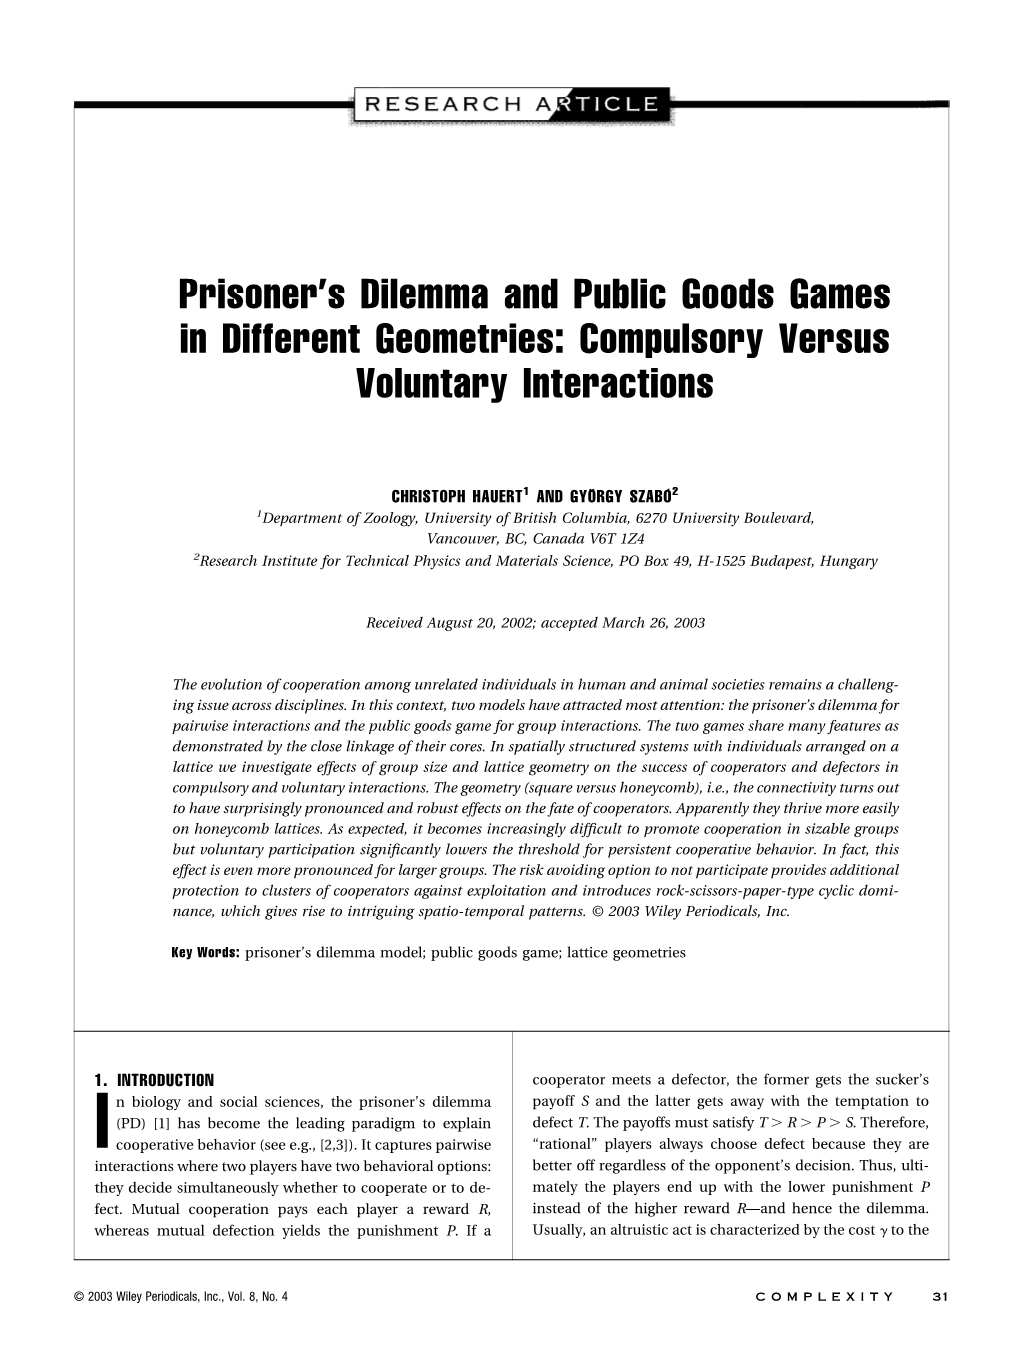 Prisoner's Dilemma and Public Goods Games in Different Geometries